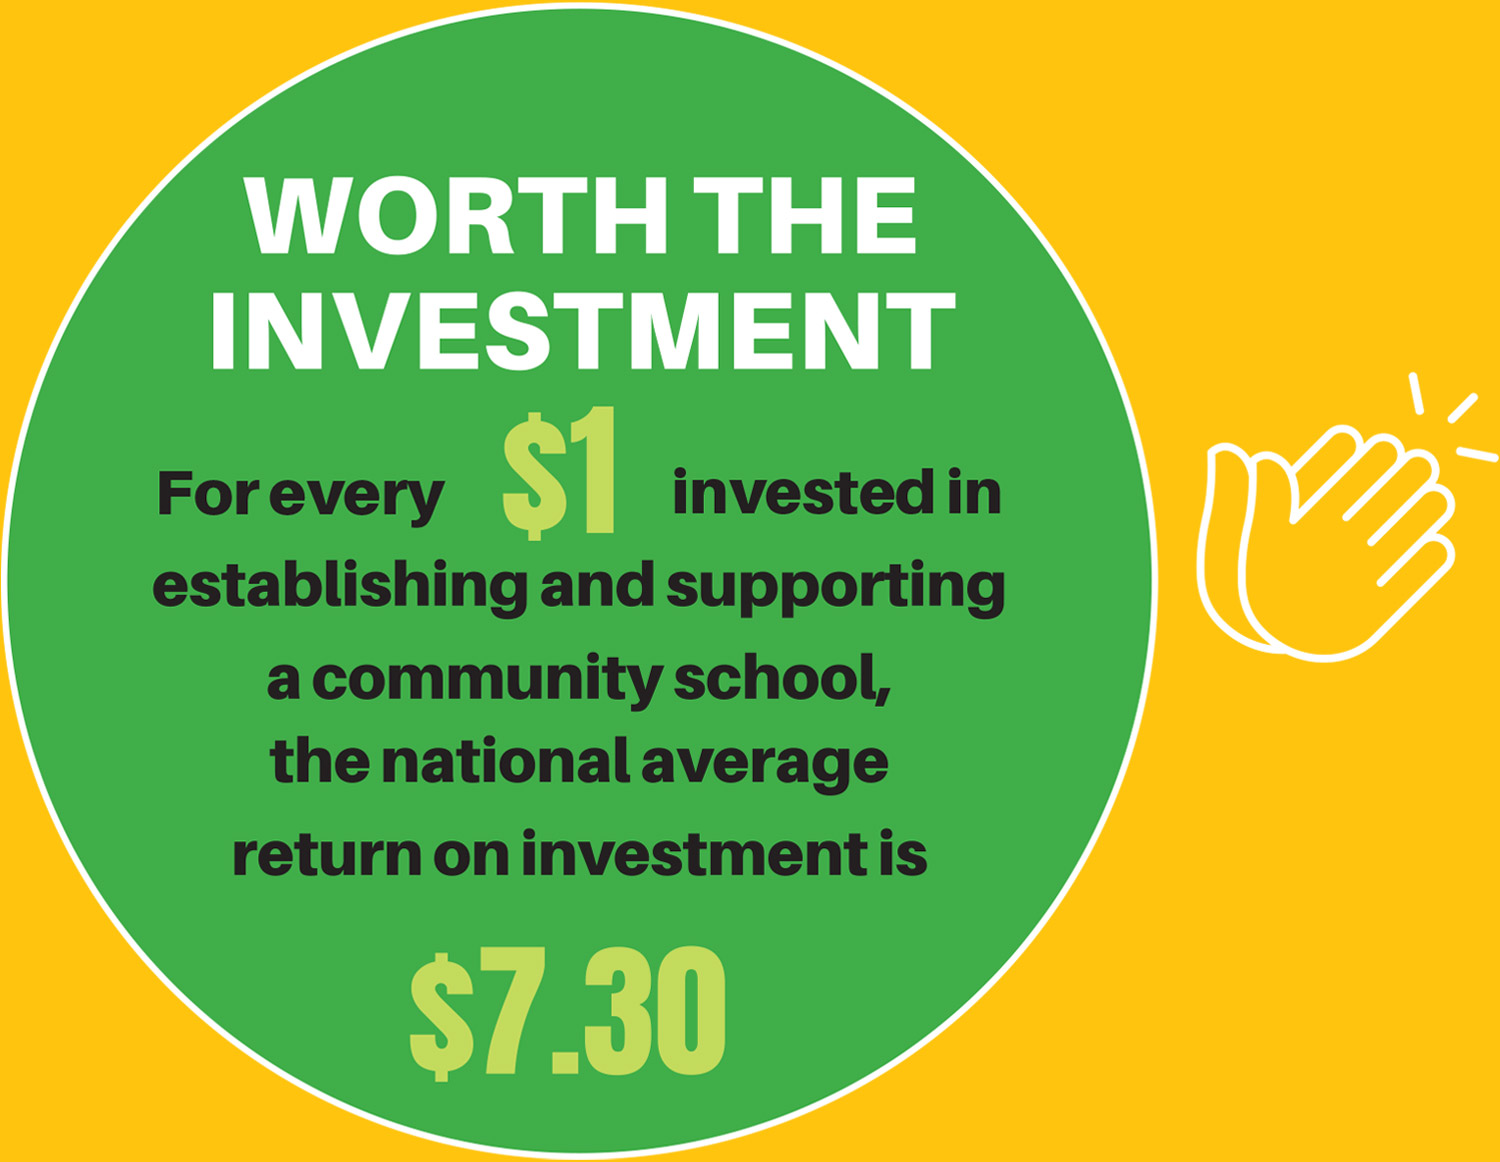 For every $1 invested in establishing and supporting a community school, the national average return on investment is $7.30